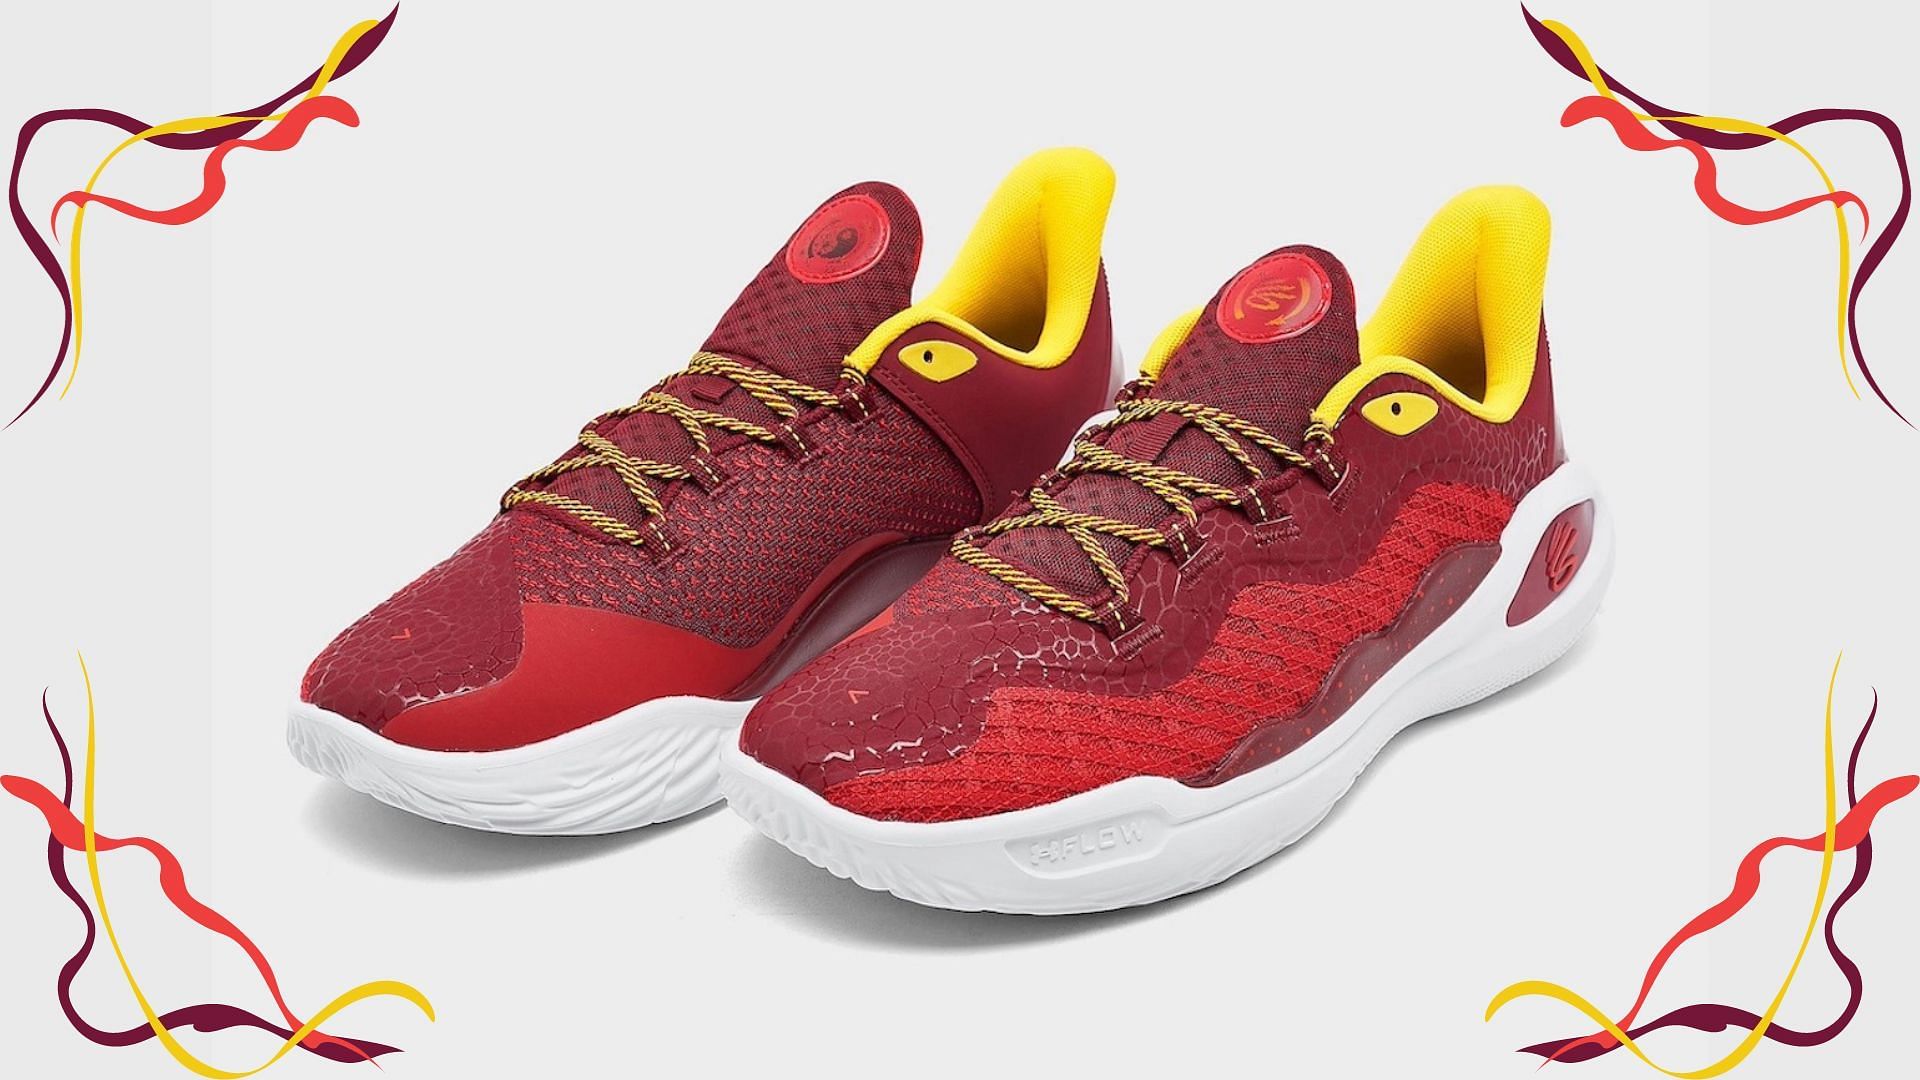 Under Armour Curry 11 sneakers (Image via Under Armour)